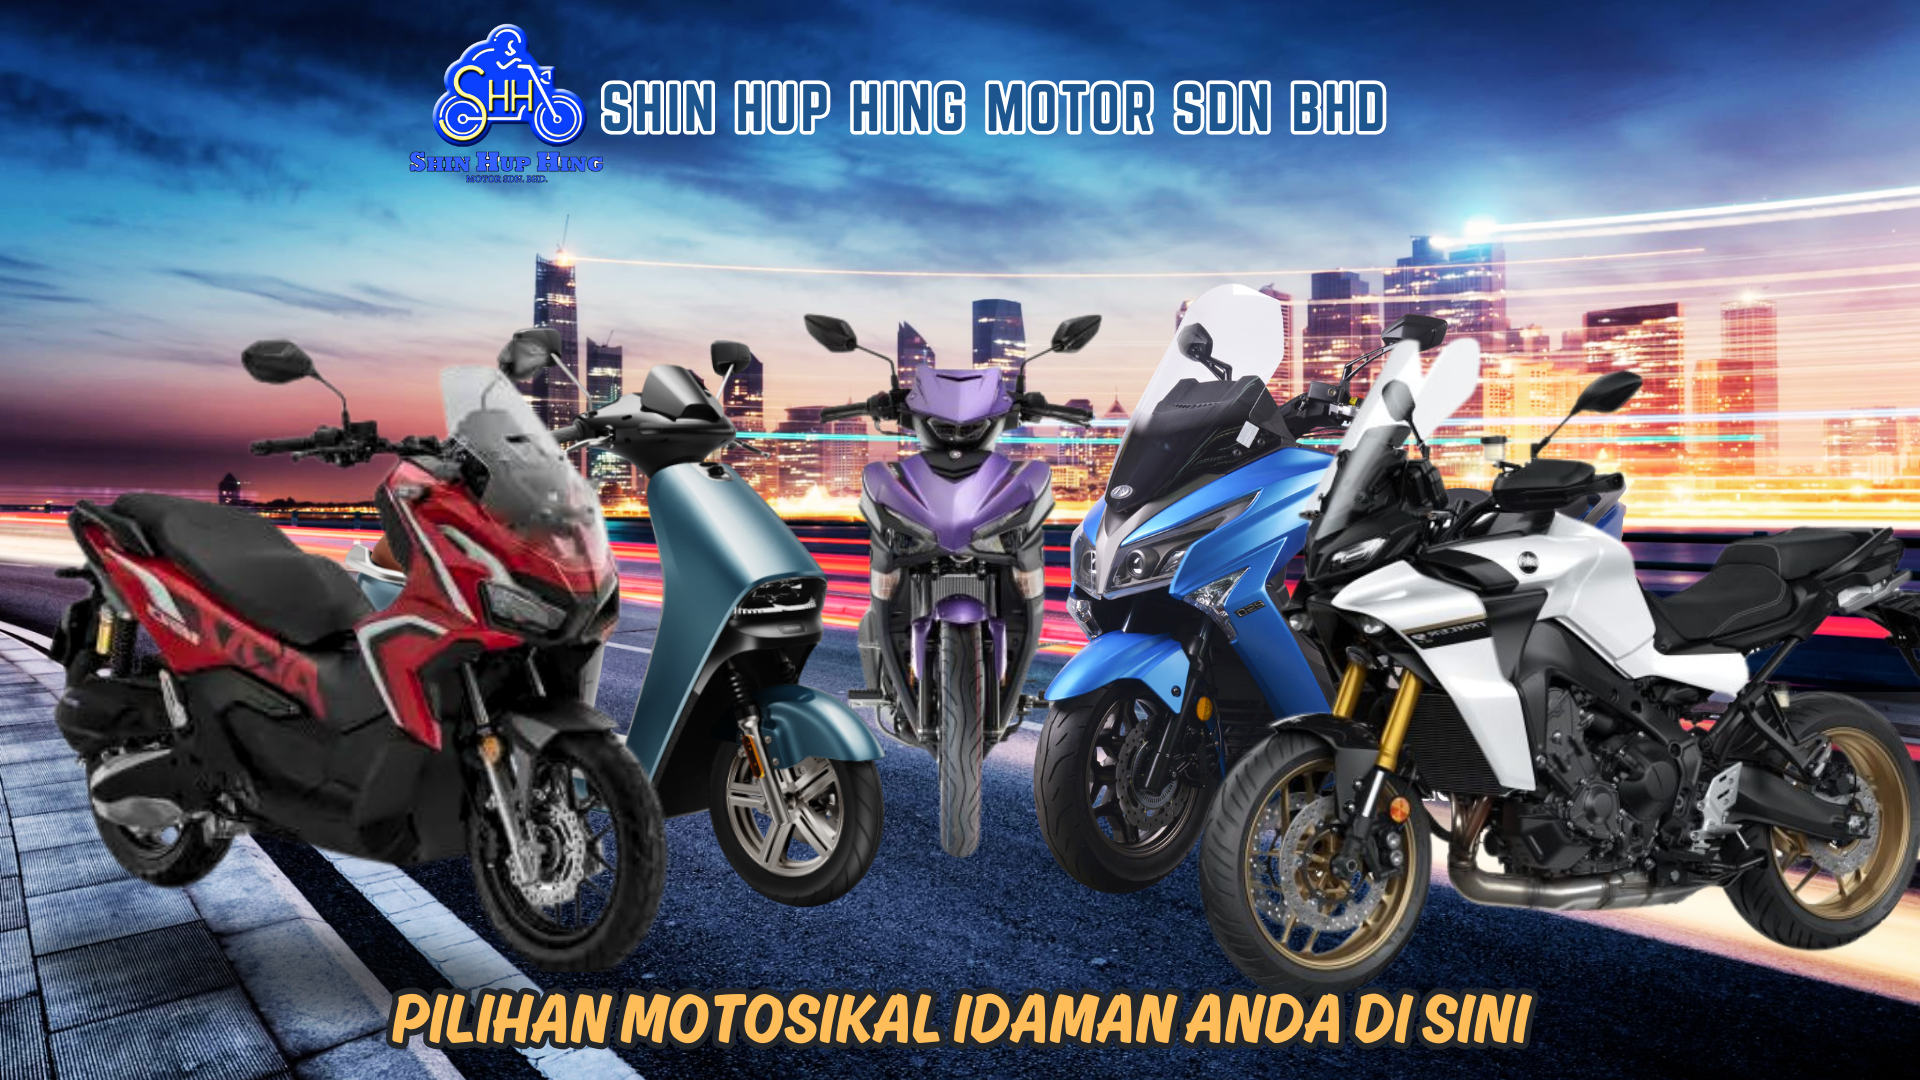 EXPLORE YOUR WORLD ON TWO WHEELS  | Shin Hup Hing Motor Sdn Bhd